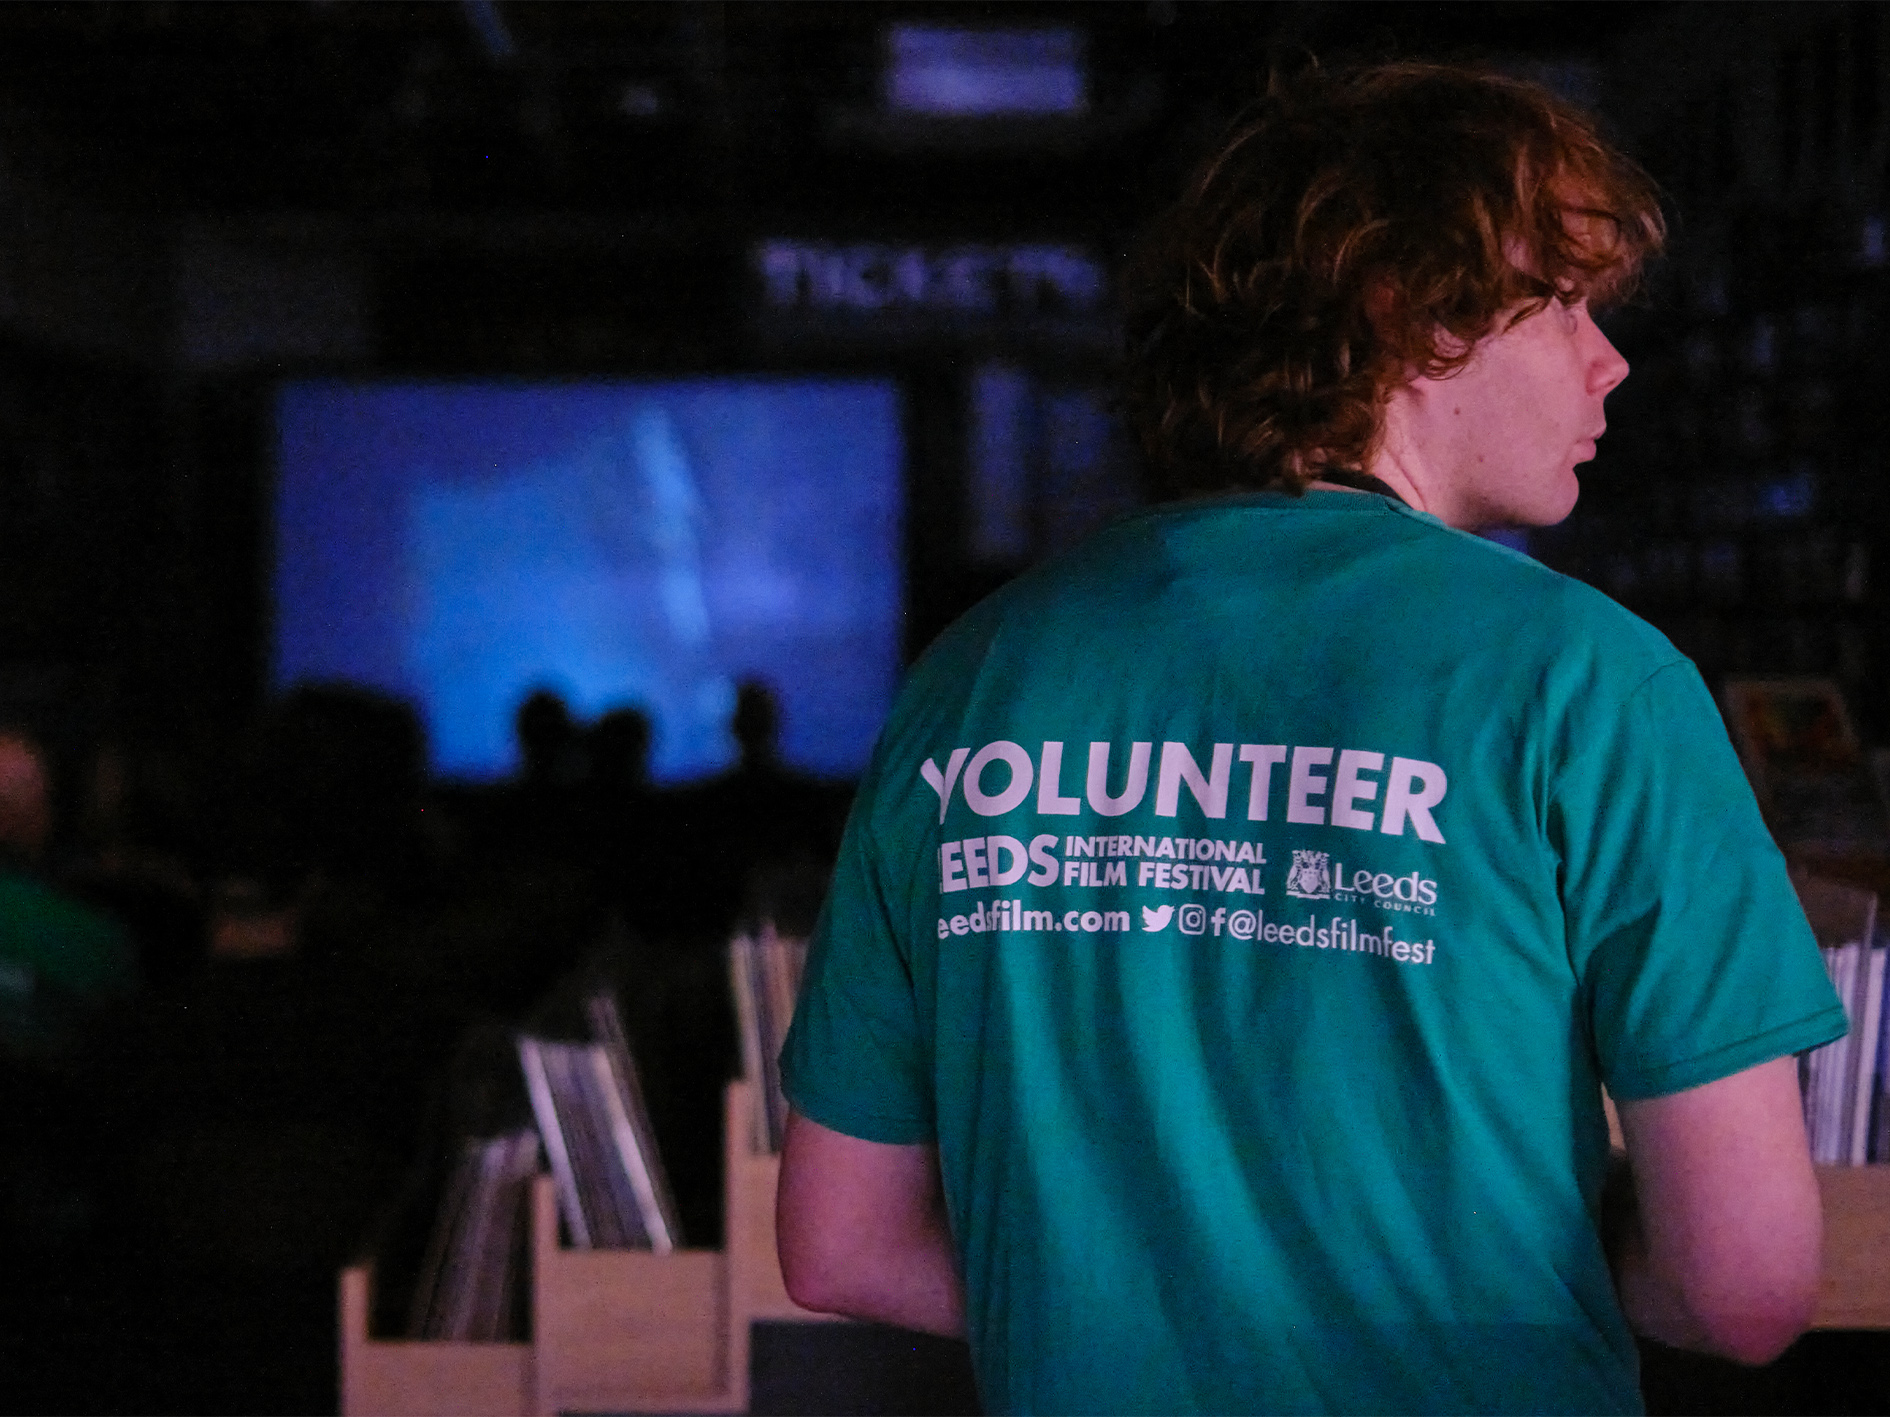 A young person can be seen from behind with "VOLUNTEER" written on their T-Shirt. A screen with the silhouette of an audience can be seen in the background. 